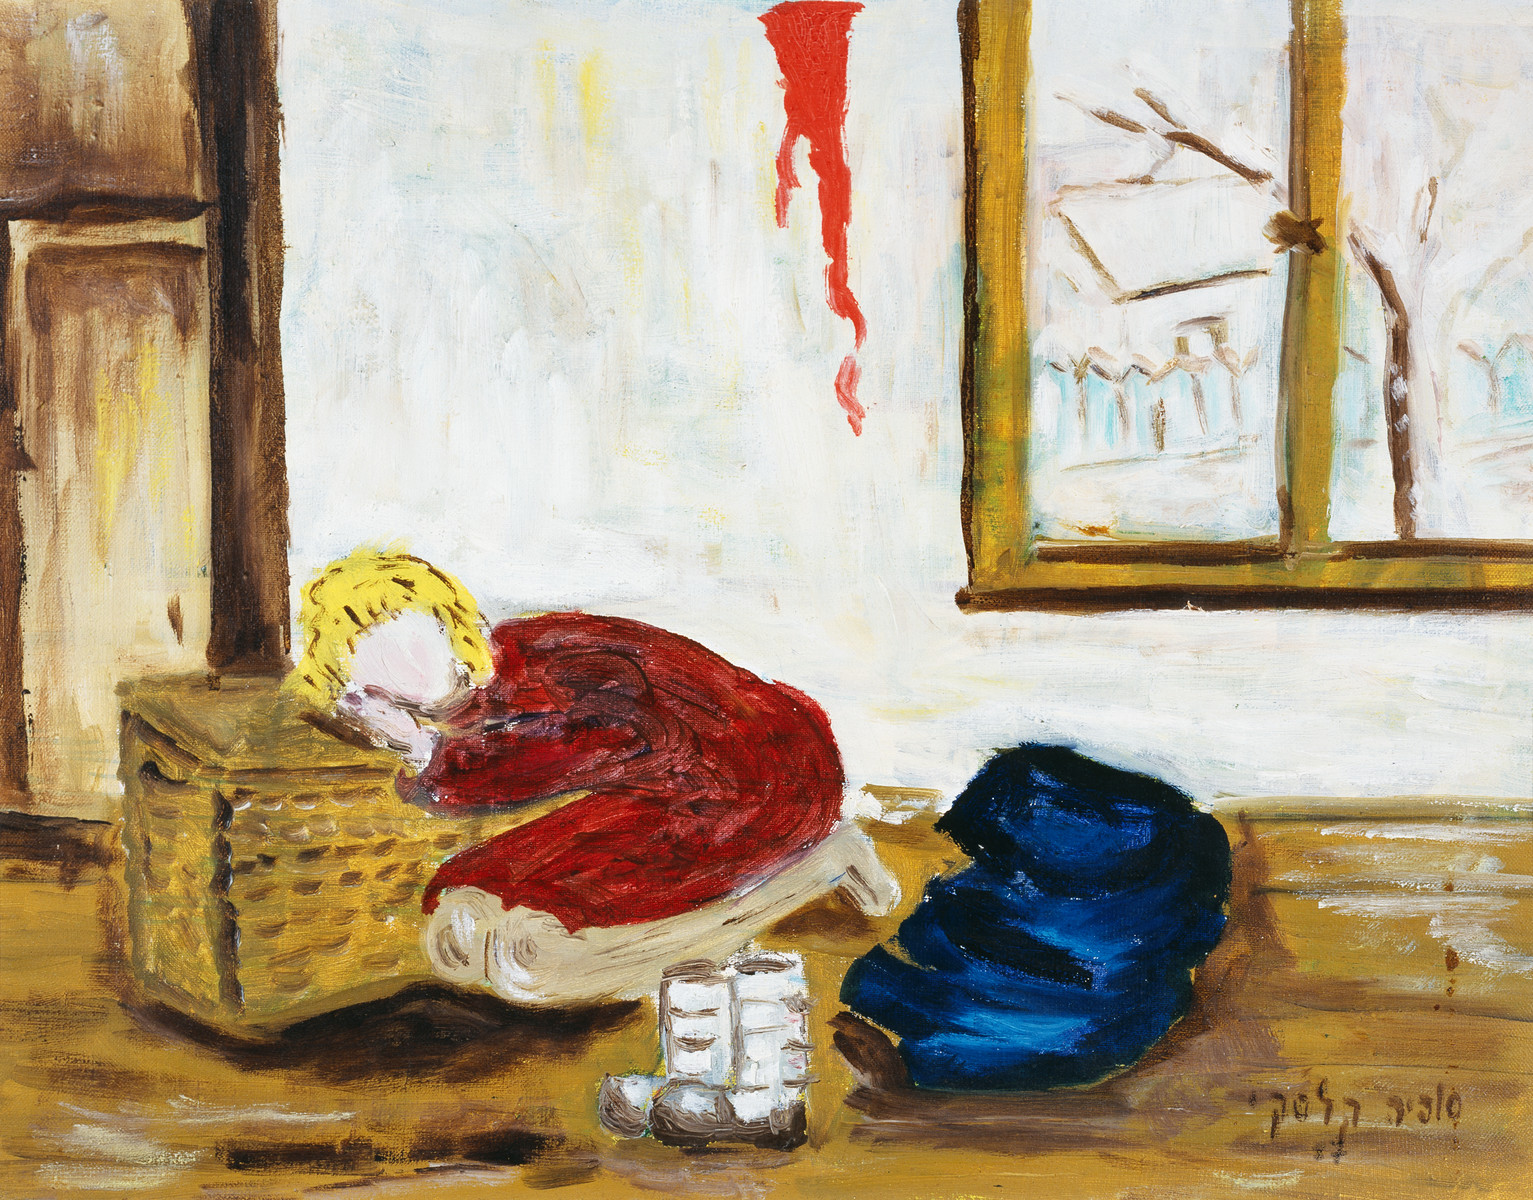 A painting by artist Sophia Kalski depicting Lwow in the February 1943.   

The artist writes "I reached some apartment. I hid my shoes which were too small for me and my coat. I am very hungry and exhausted. There is no one with me. I long to put my head on my father's shoulder, but he isn't anymore. I put my head on a crate that was in the empty room."